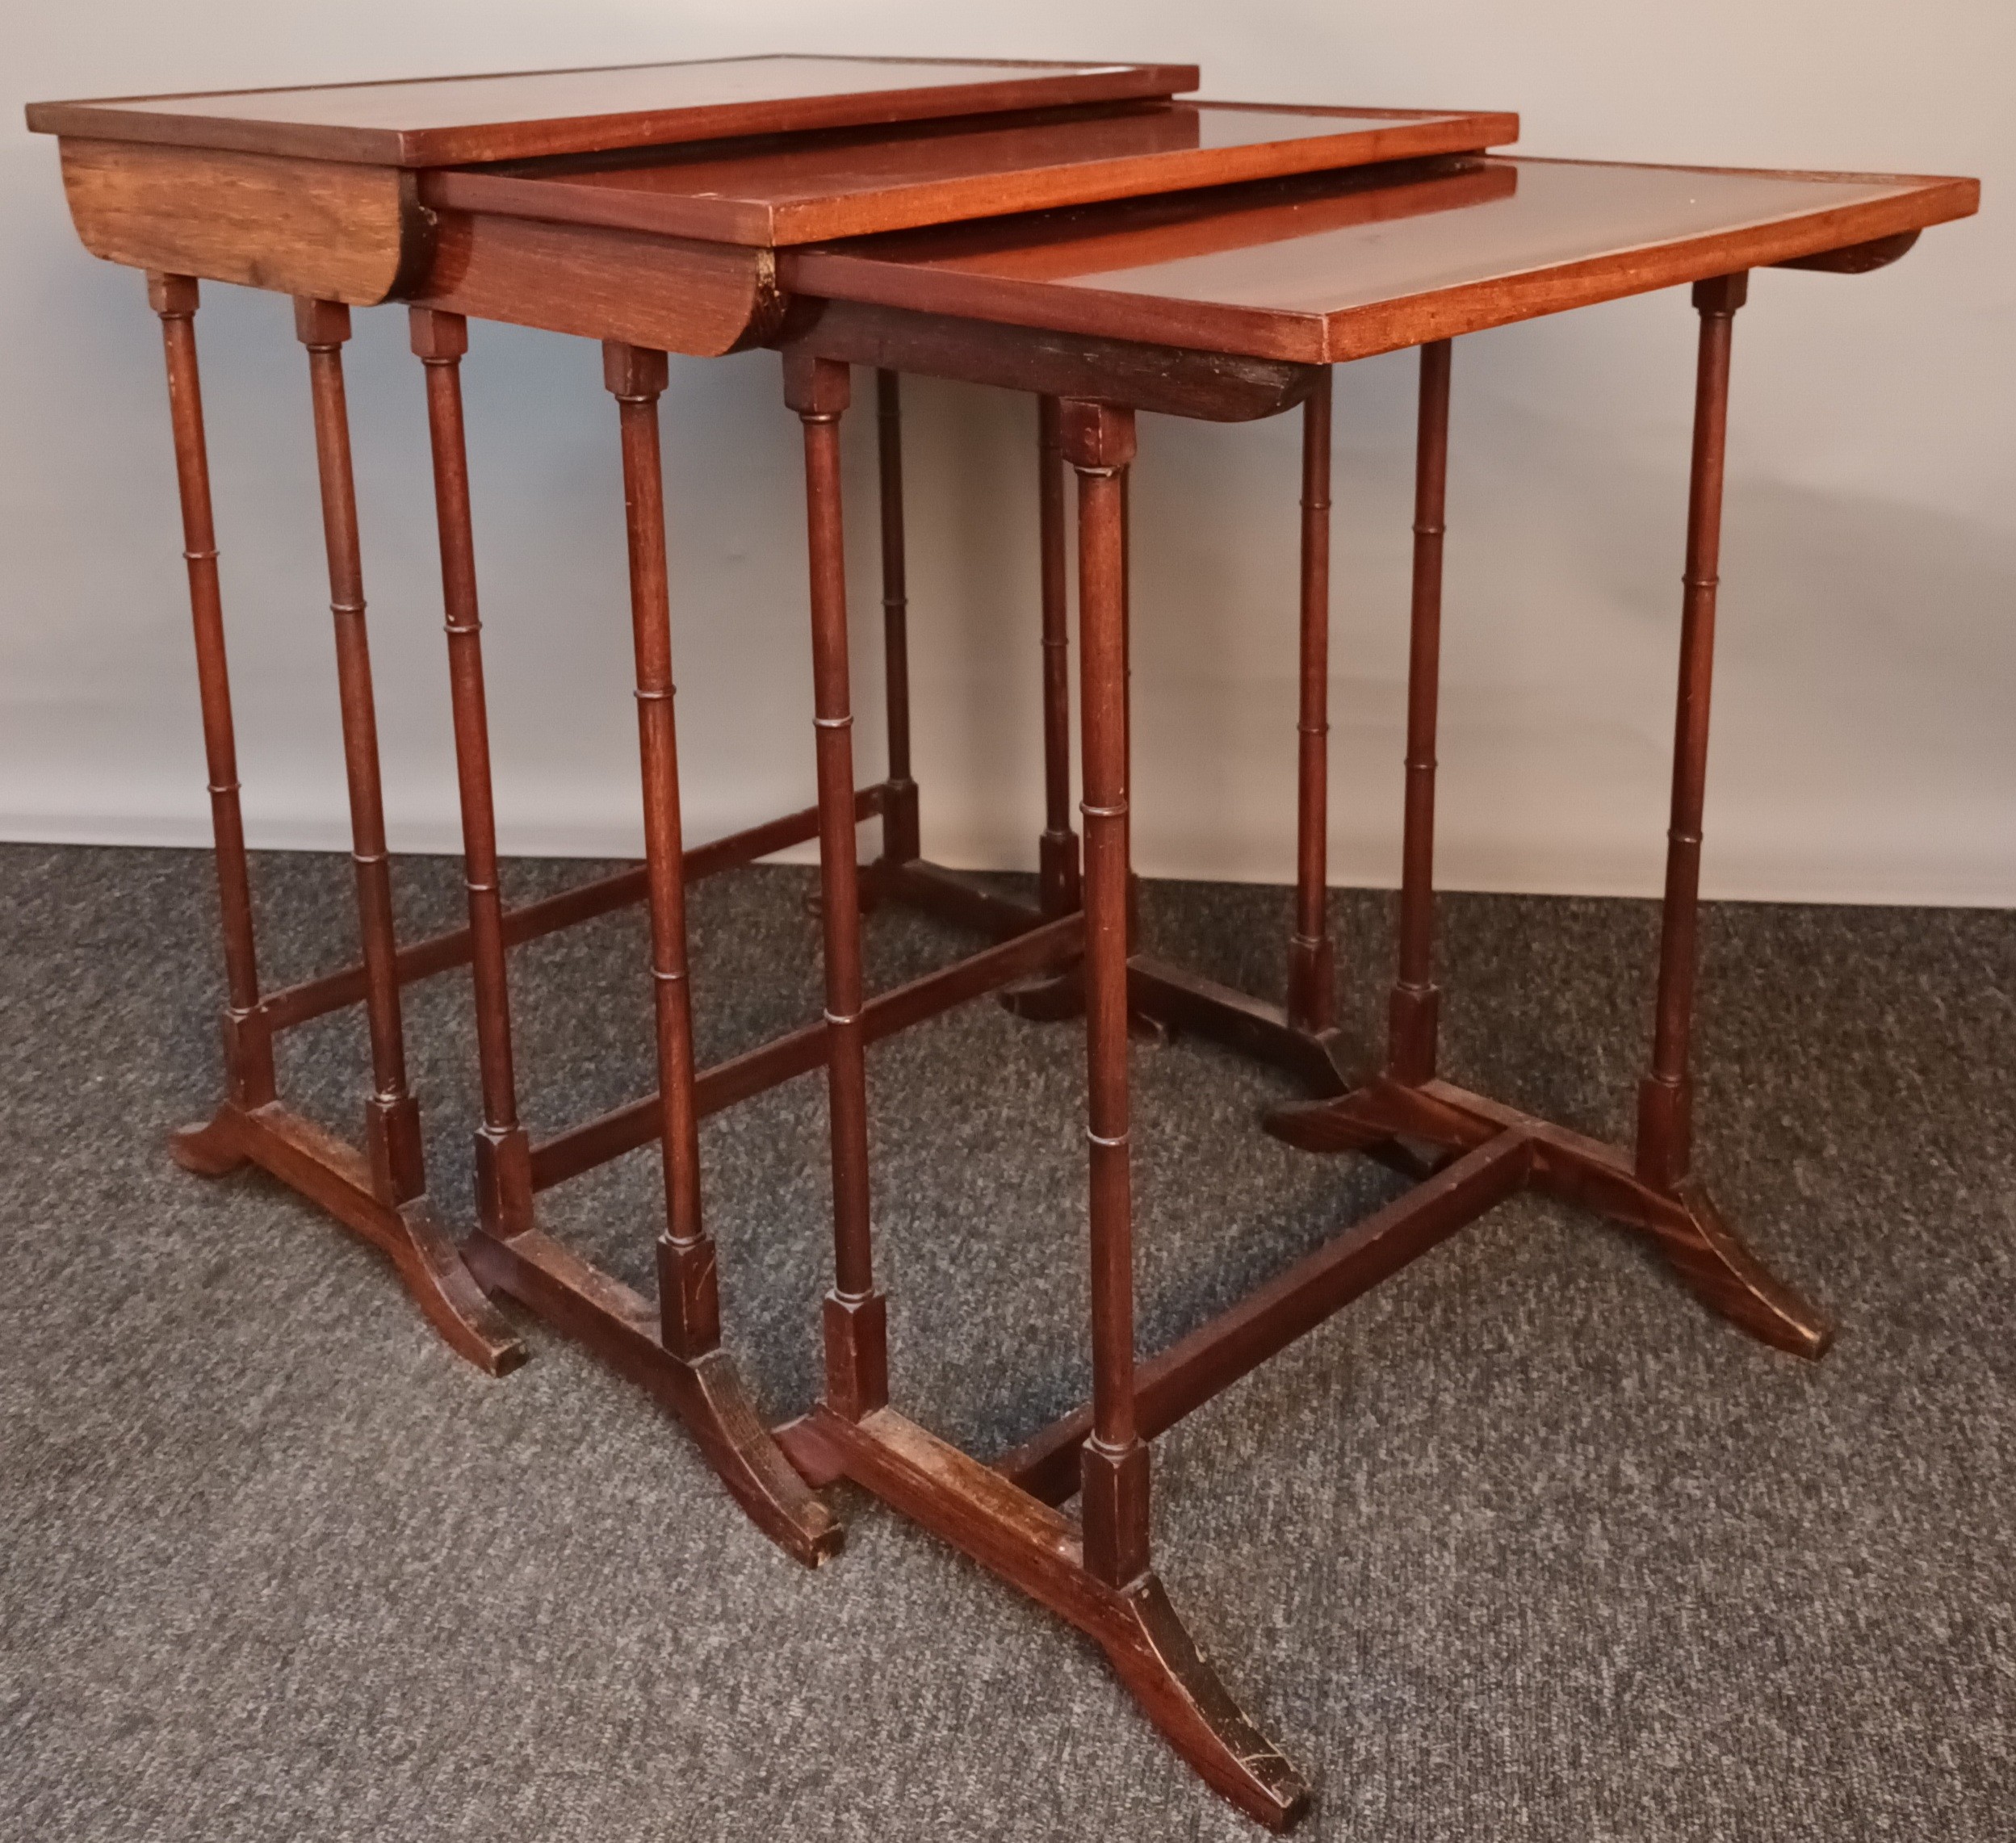 Antique nest of three tables, the surface with parquetry inlay and raised on trestle supports[